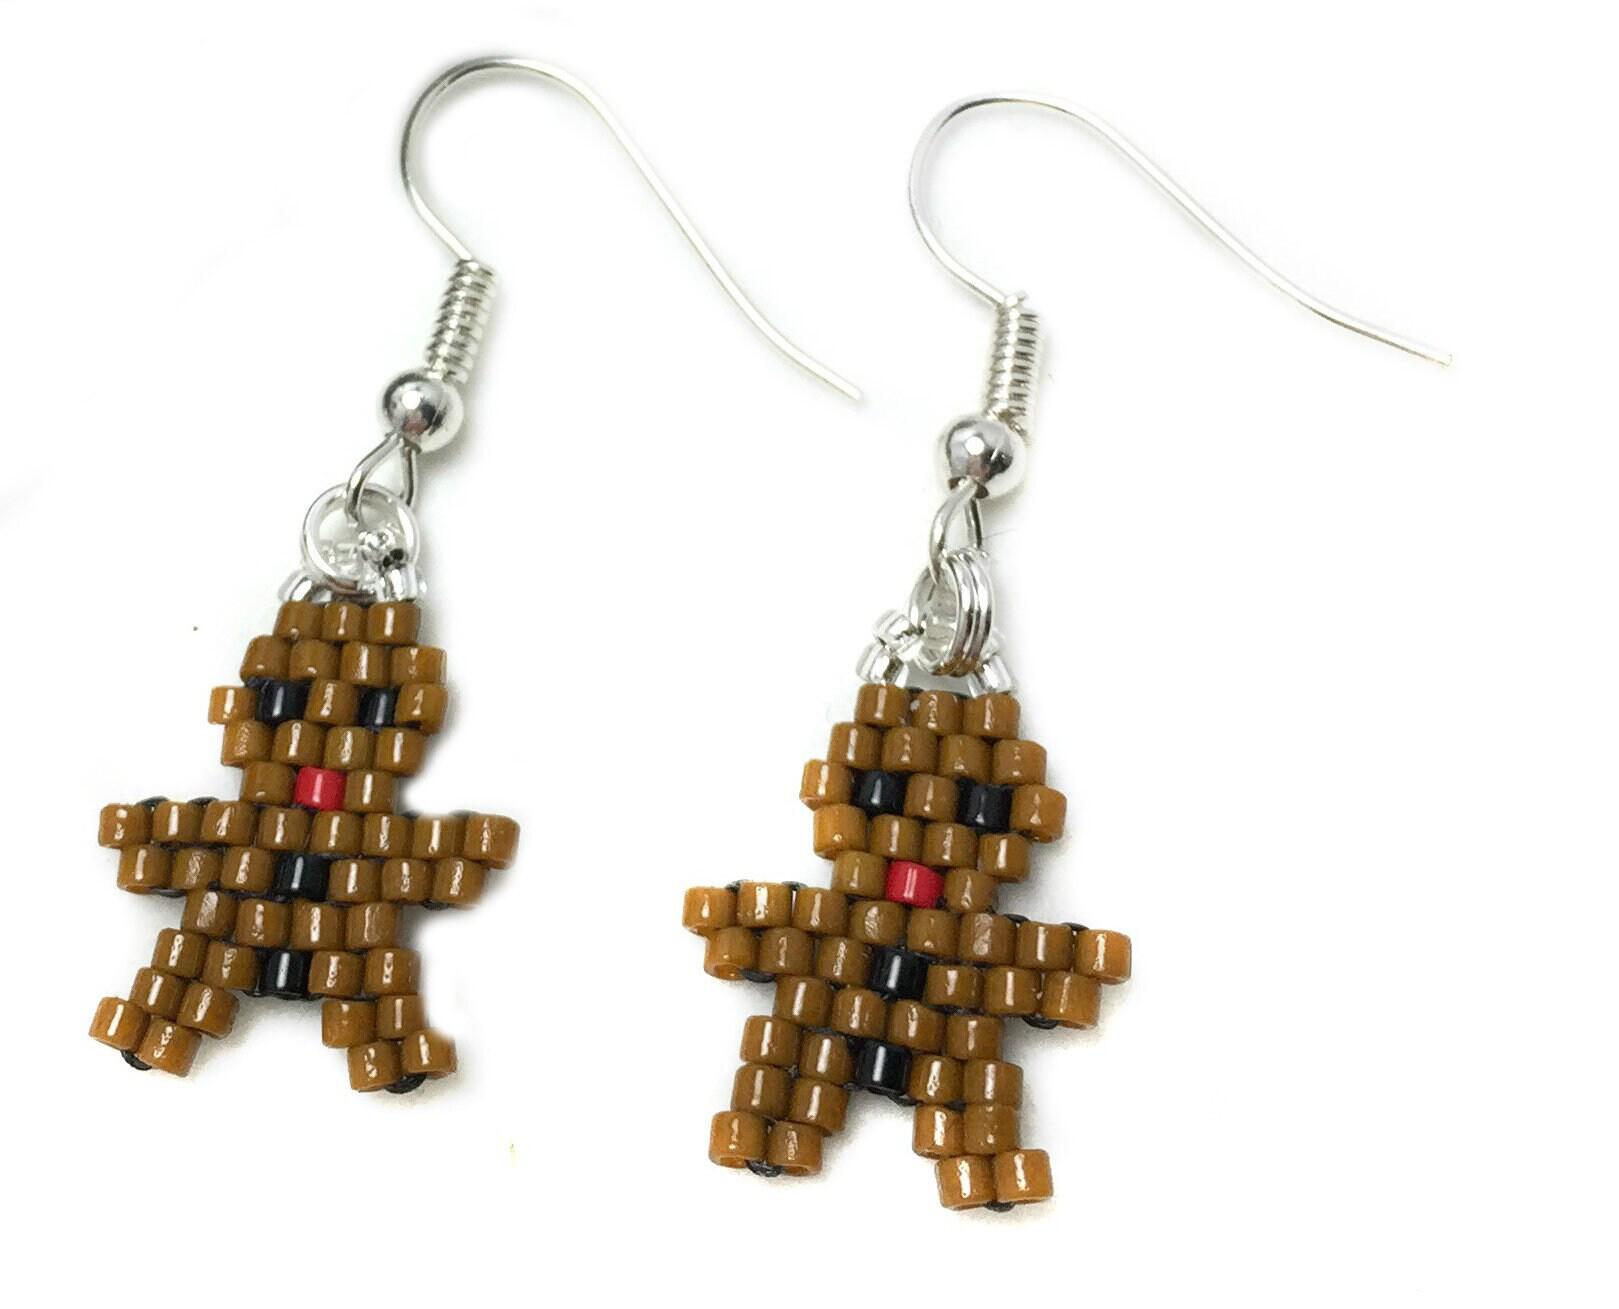 Little Gingerbread Man Charms, Christmas Bead Dangles Made from Small Glass Beads 10 Charms